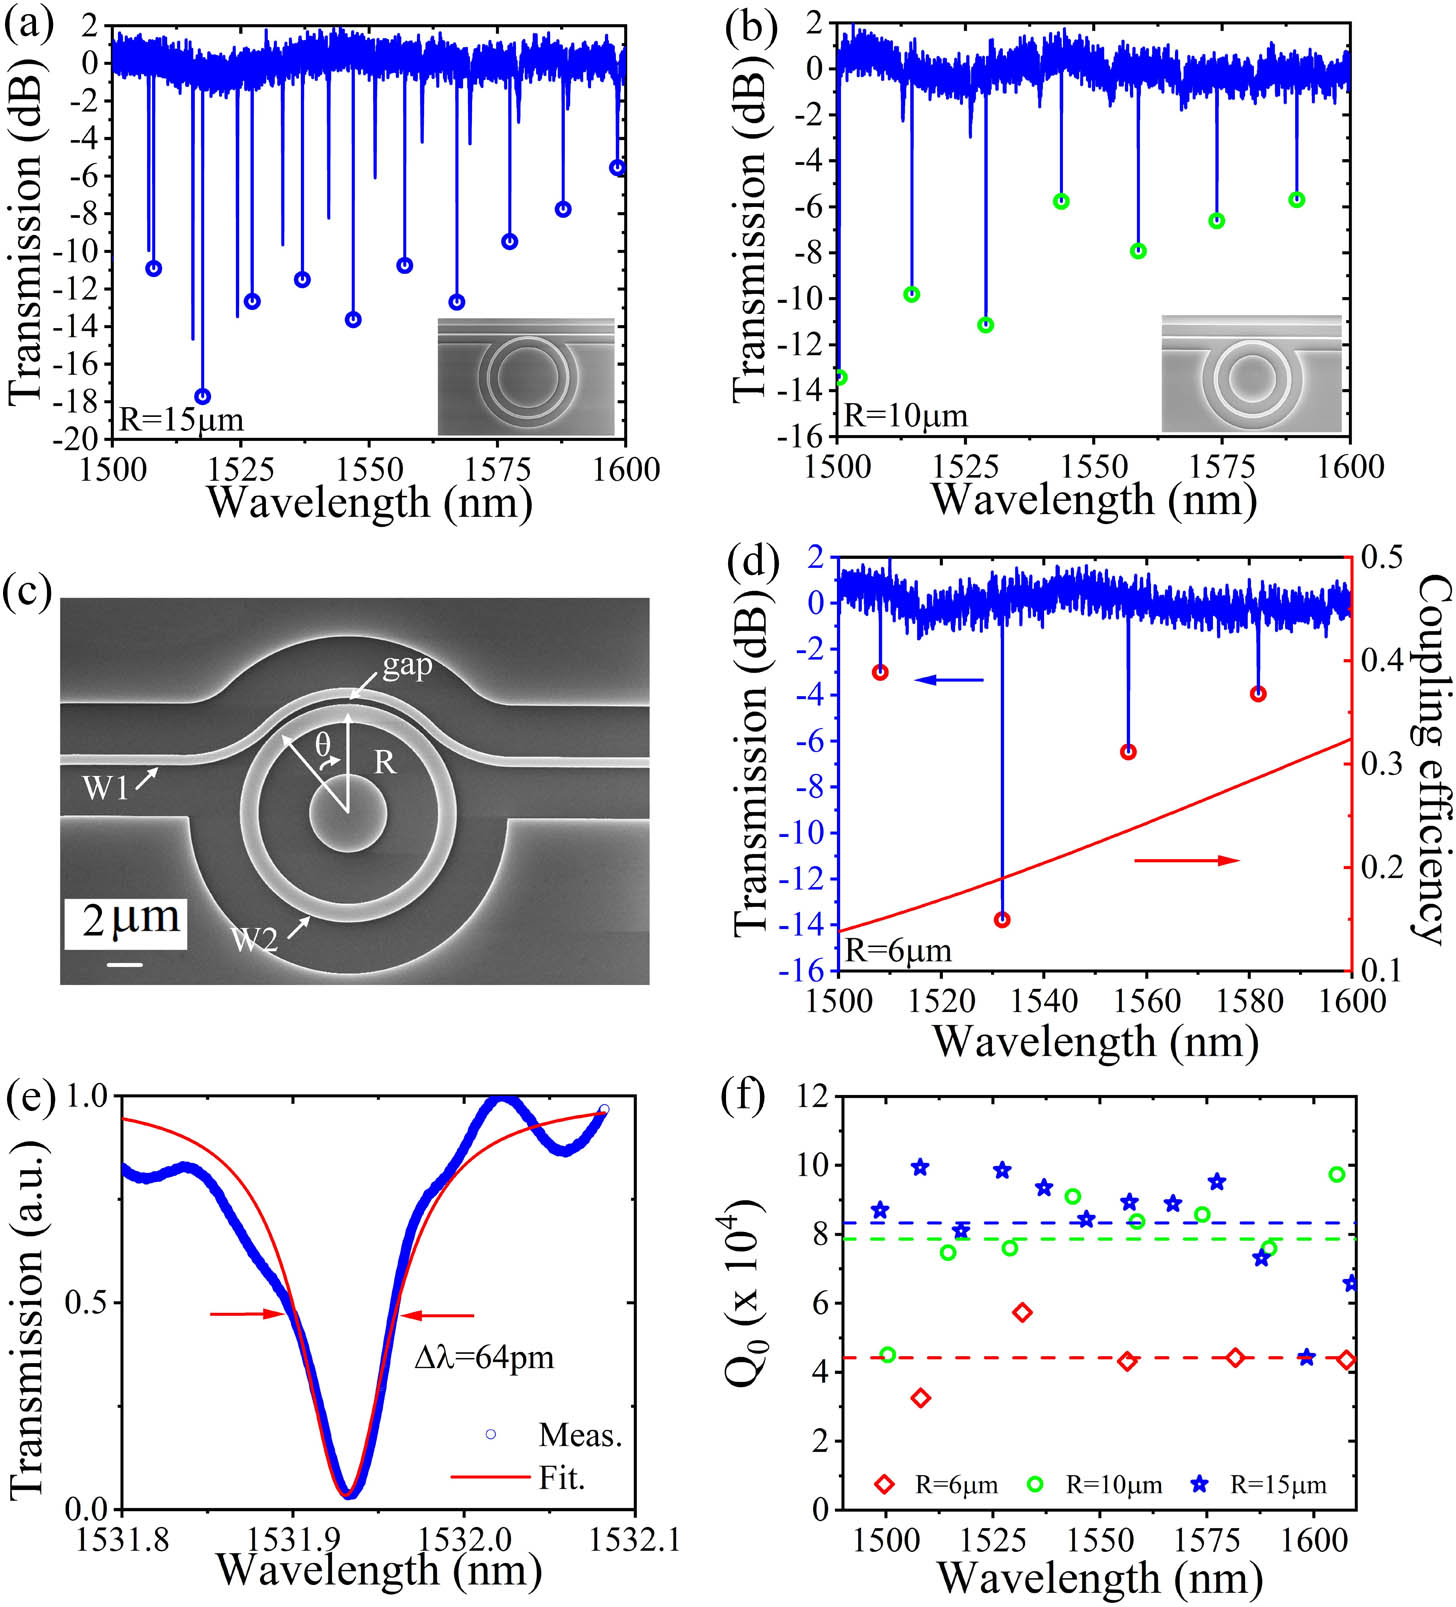 Linear measurements of the fabricated TiO2 MRRs. Transmission spectra of the MRR with a radius of (a) 15 μm and (b) 10 μm. Insets are the SEM images of these MRRs. (c) SEM image and (d) transmission spectrum of the MRR with a radius of 6 μm and a pulley-type coupler, of which the coupling efficiency is shown by the red line in (d). Circles in (a), (b), and (d) indicate the resonance positions of TE0 mode. (e) Transmission spectrum (blue dot) and Lorentzian fitting curve (red line) of the 6-μm-radius MRR around the resonance of 1531.93 nm. (f) Summary of the extracted Q0 at all the resonances of the three MRRs with dashed lines indicating the average Q0 values.